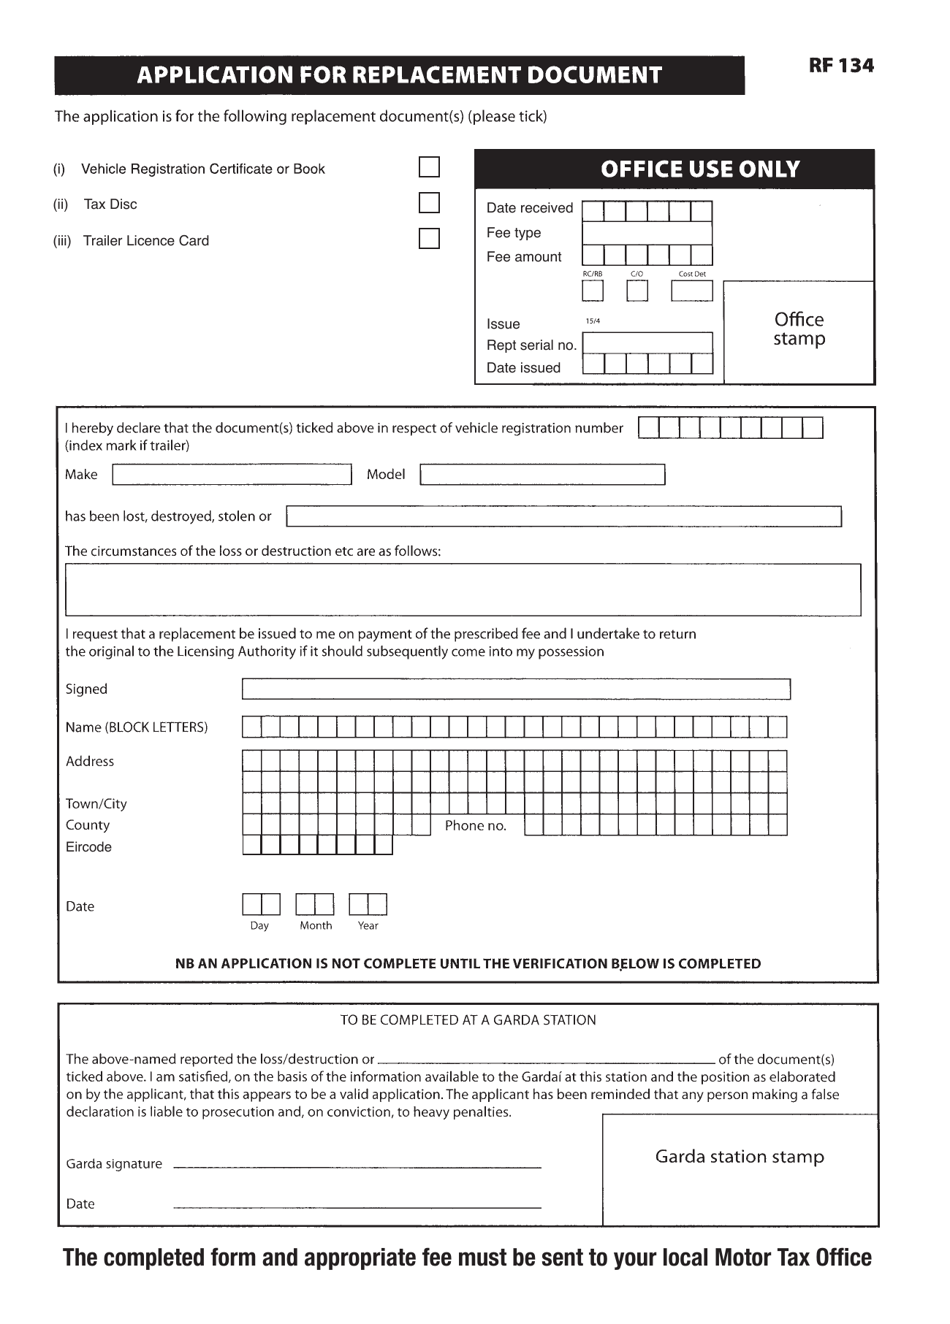 Form RF134 Application for Replacement Documents - Ireland, Page 1